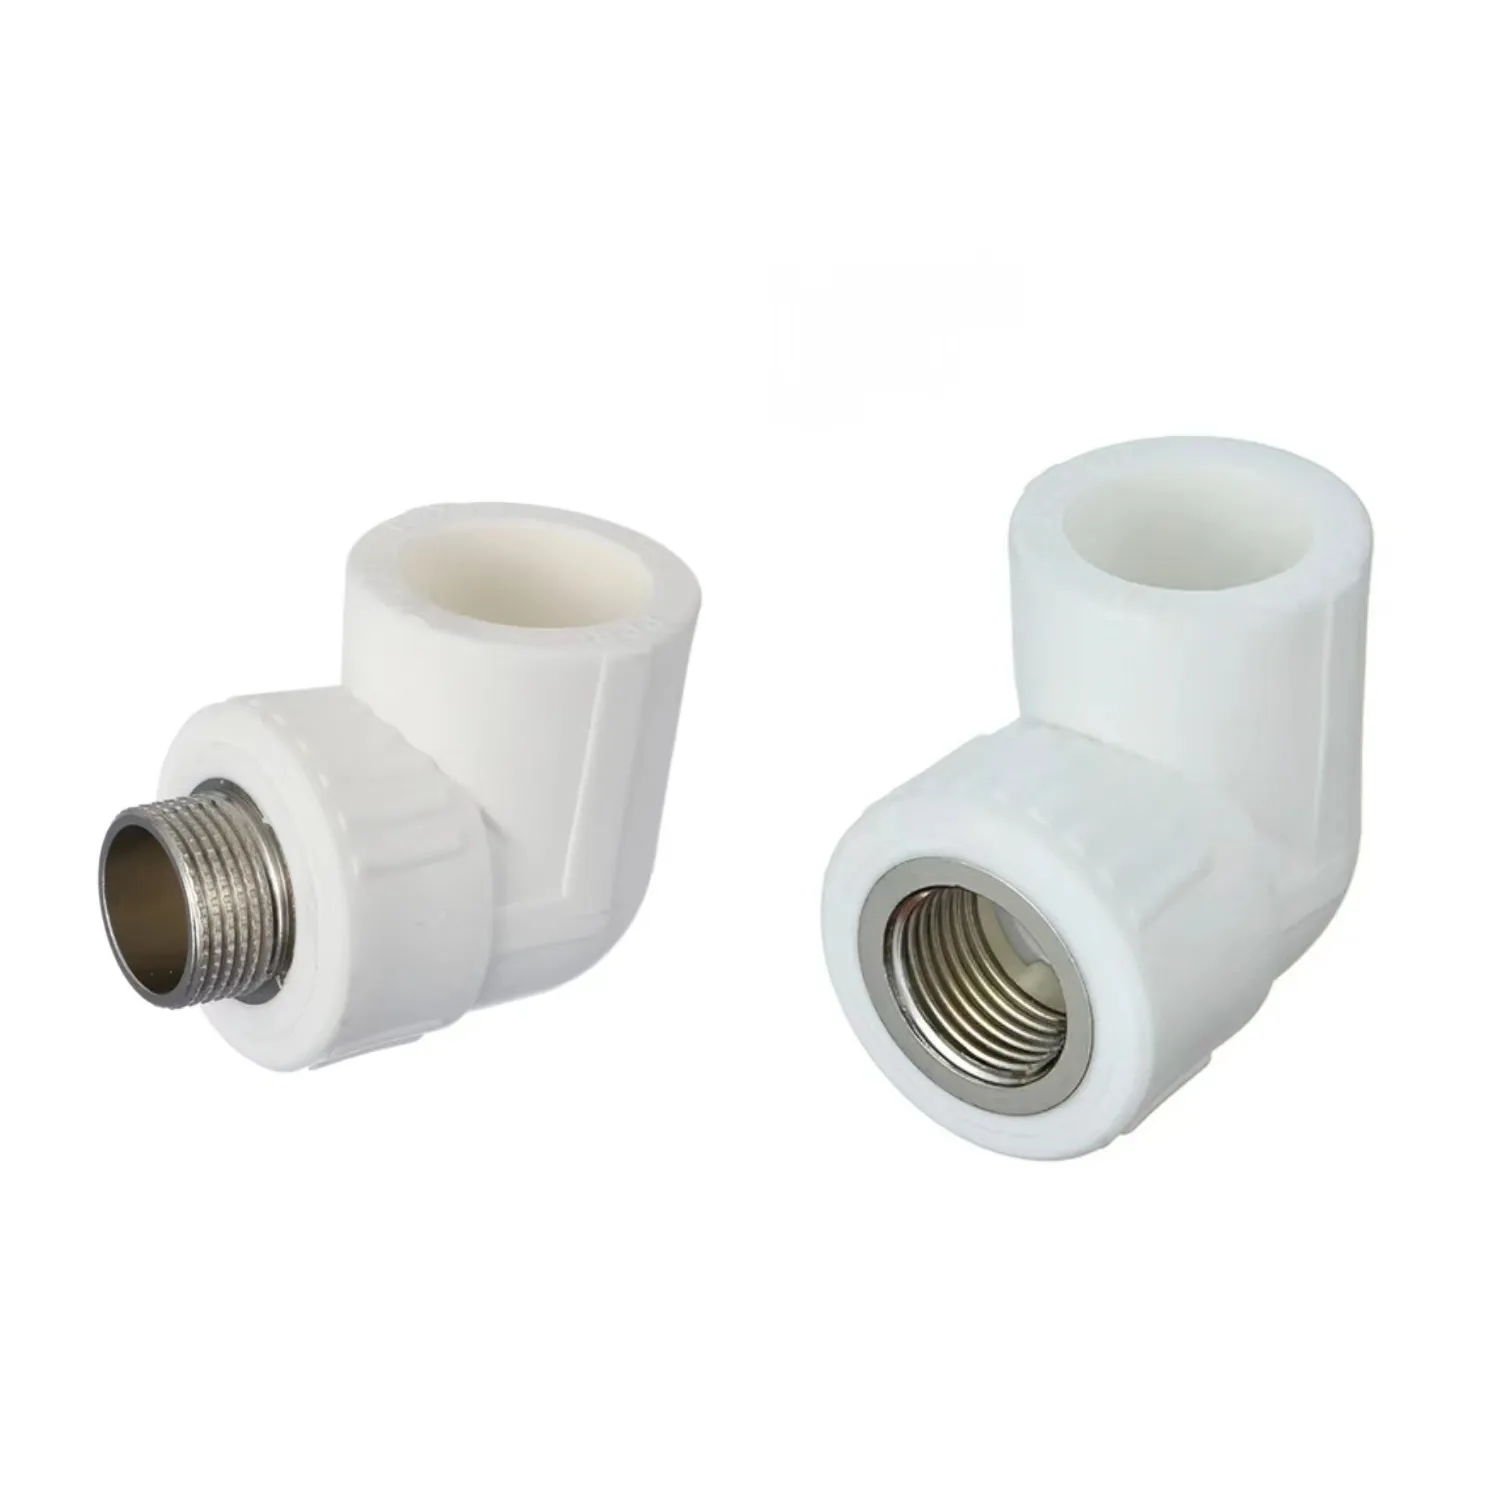 PERT-II Socket female and male elbow coupling tube for pipe fitting coupling